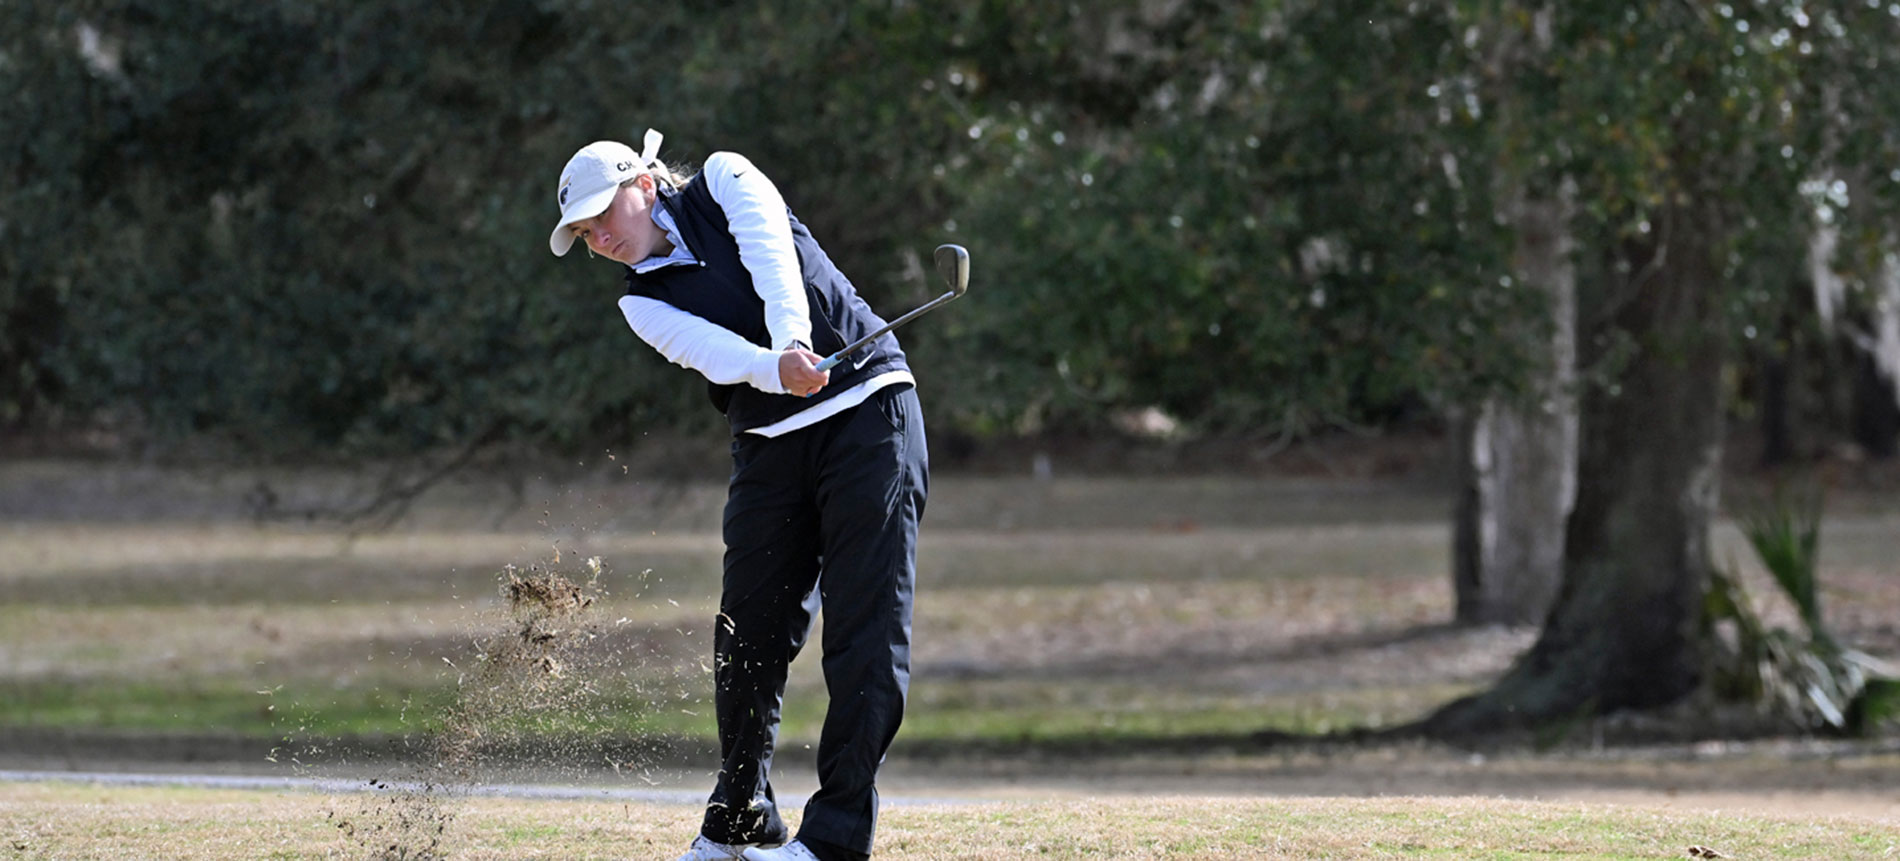 Emerald Coast Classic Washed out Midway Through Final Round; Women’s Golf Finishes Tied for Second